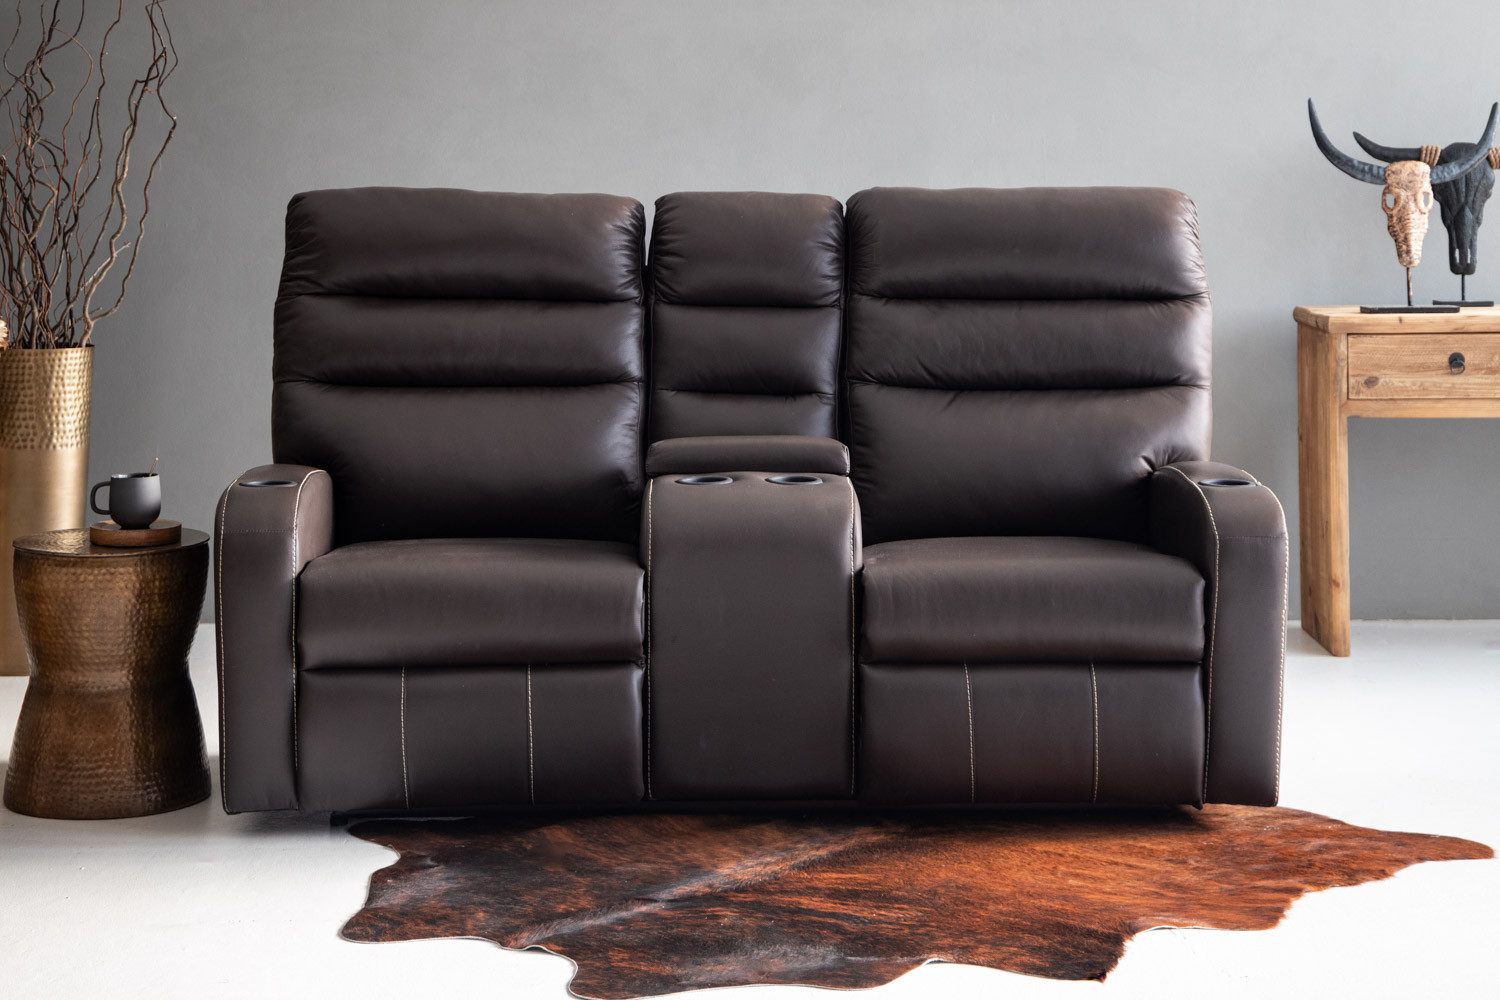 Fraser 2 Seater Leather Cinema Recliner - Coco 2 Seater Recliners - 1